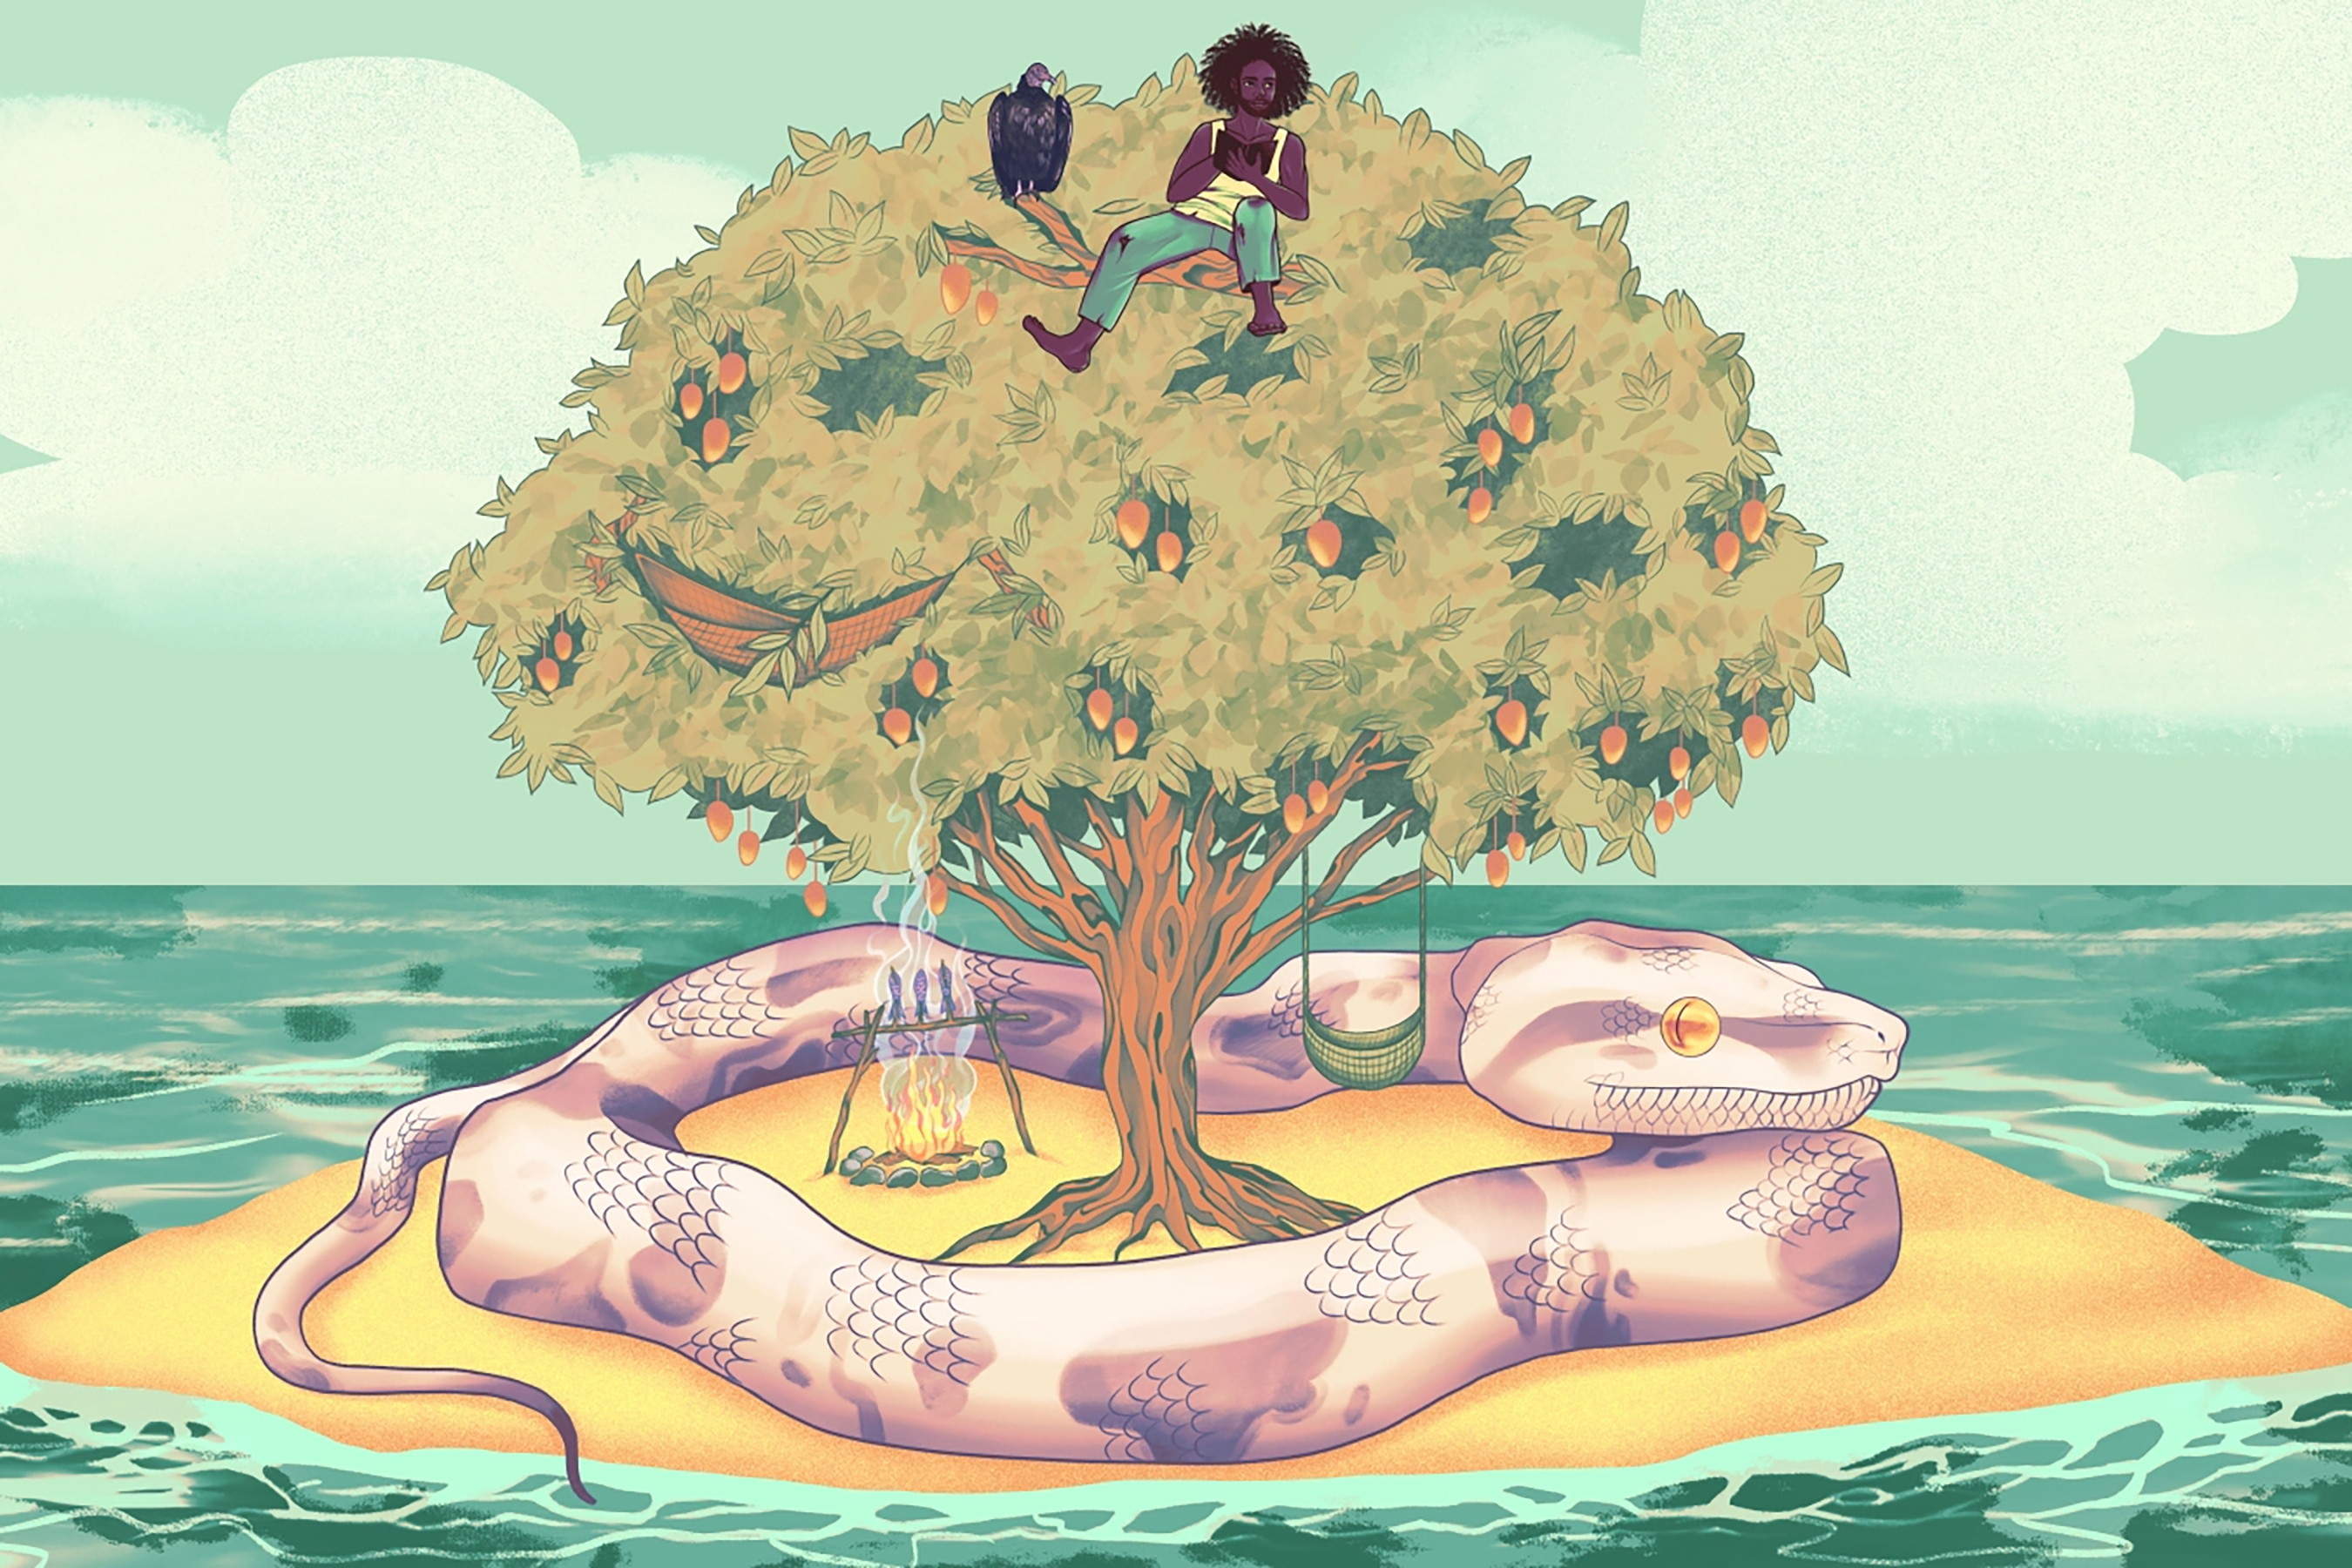 An illustration of a person sitting next to a vulture, atop a mango tree, on a small island with a large snake lying below the tree, by Amelia Bates